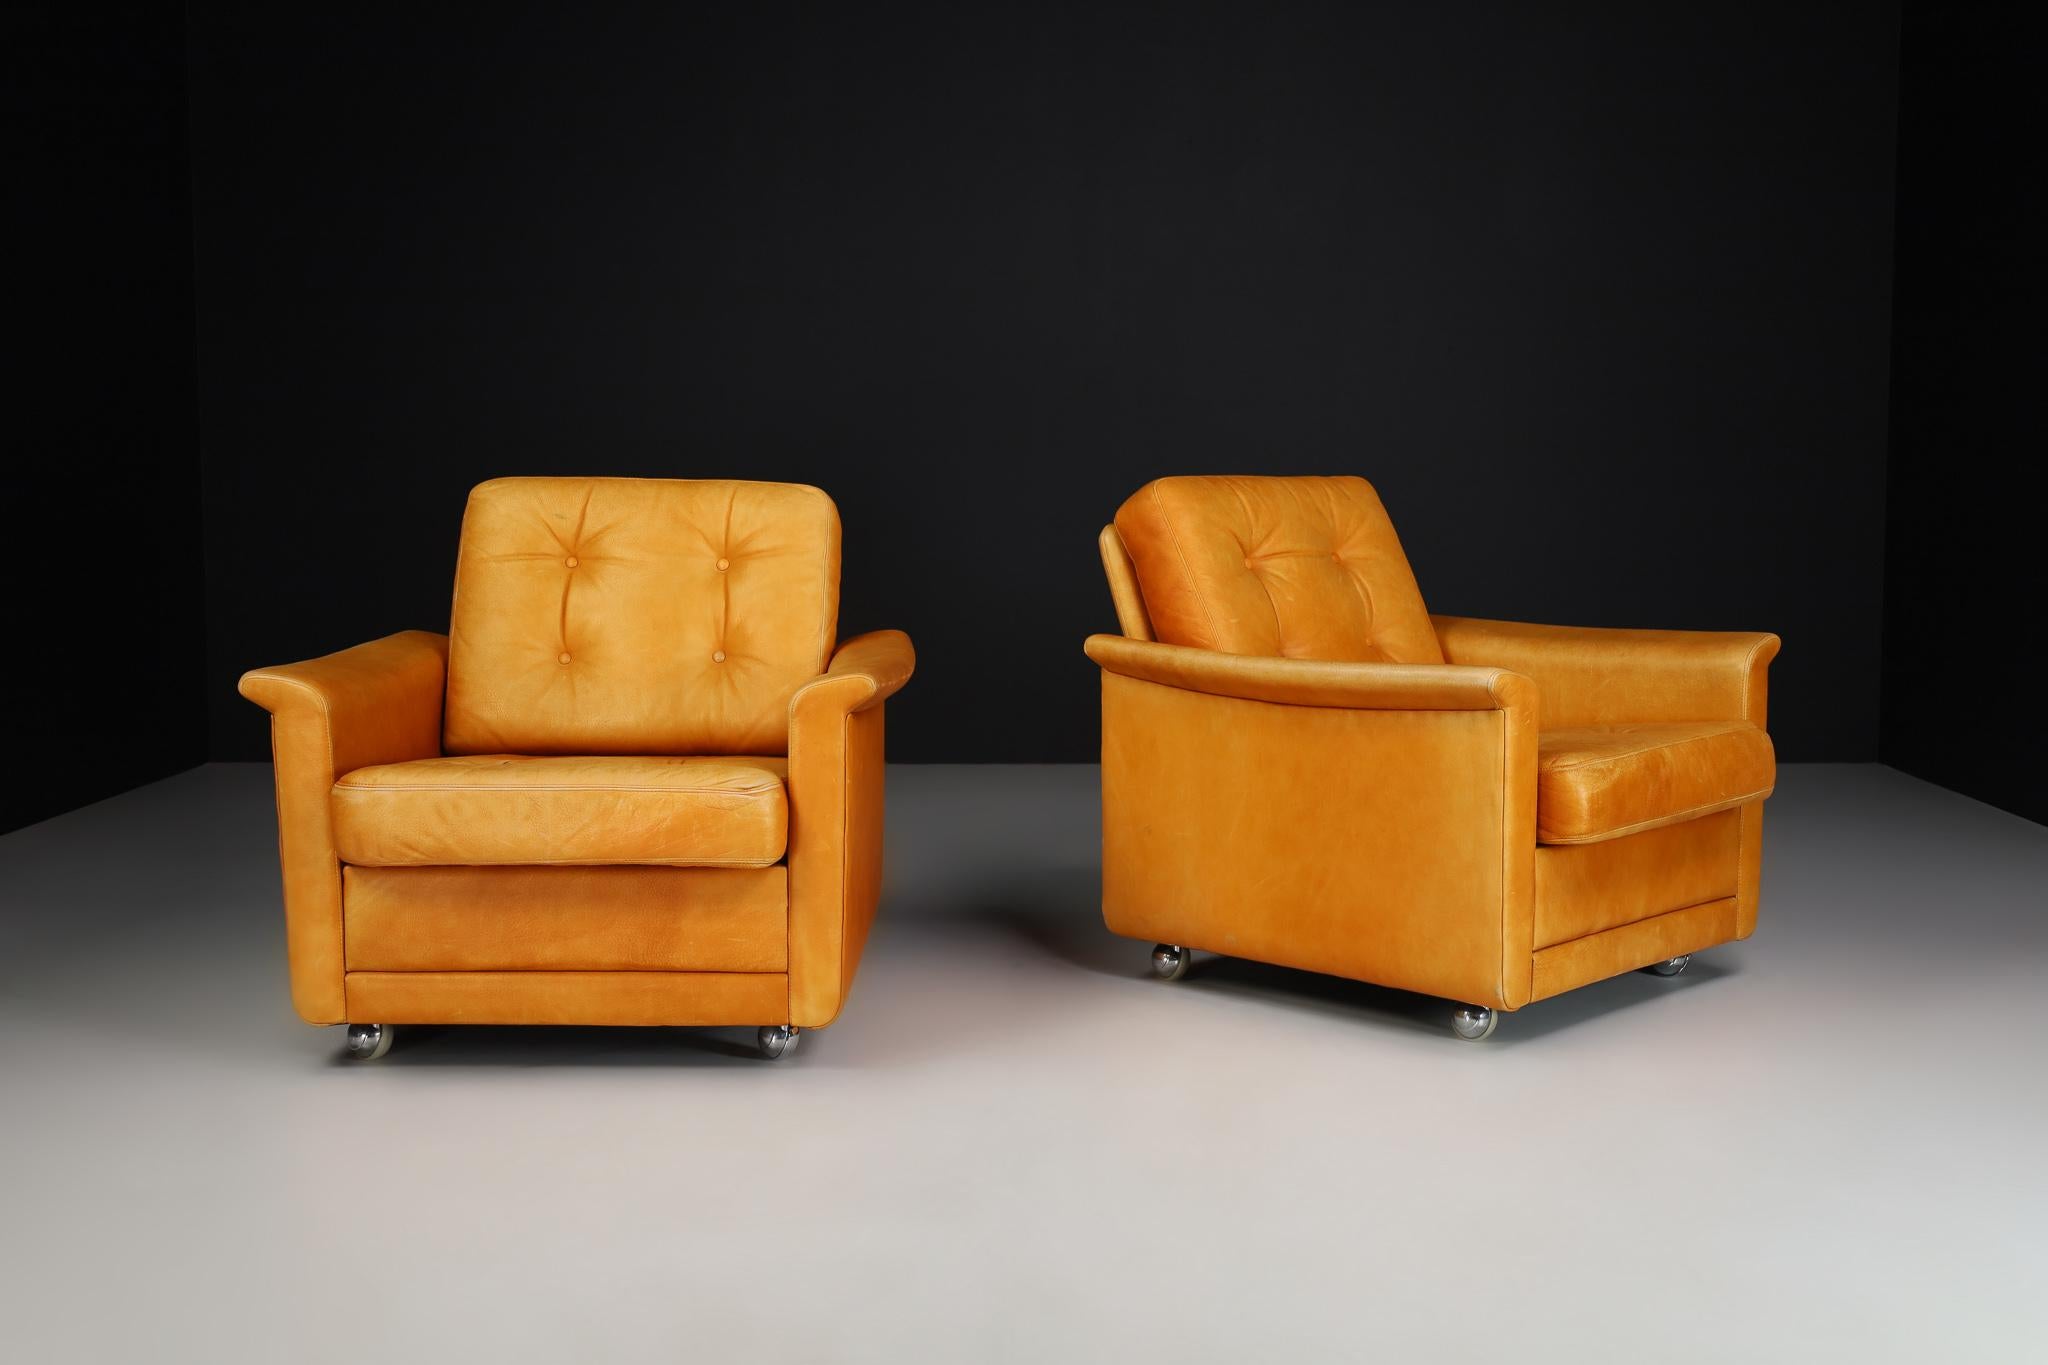 Mid-century cognac leather armchairs-lounge chairs, Germany, 1960s.

Mid-century cognac leather armchairs-lounge chairs manufactured and designed in Germany 1960s. It is in lovely vintage condition, with a minor patina on the leather. These